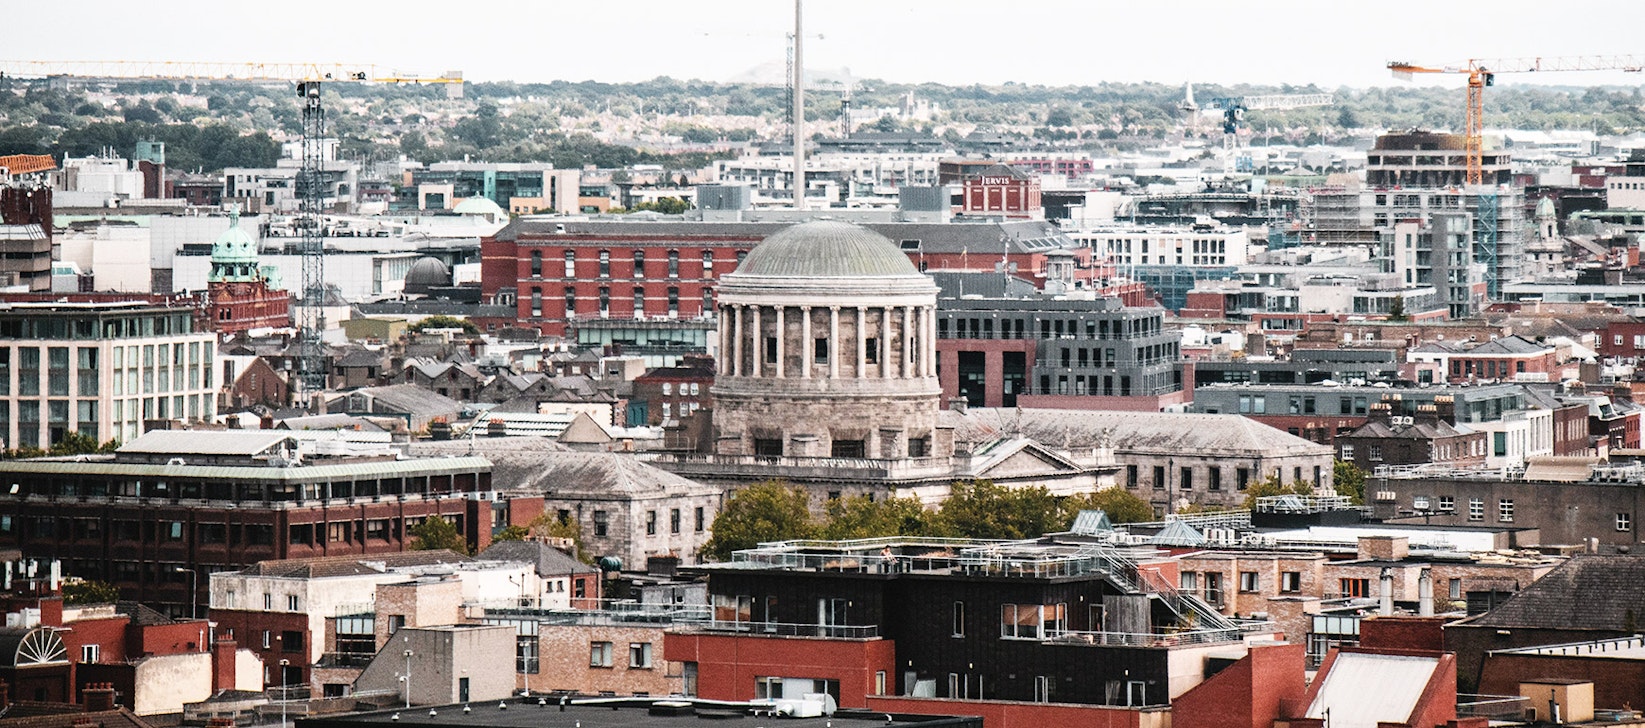 Dublin can be at the heart of a new approach to meeting future skills needs